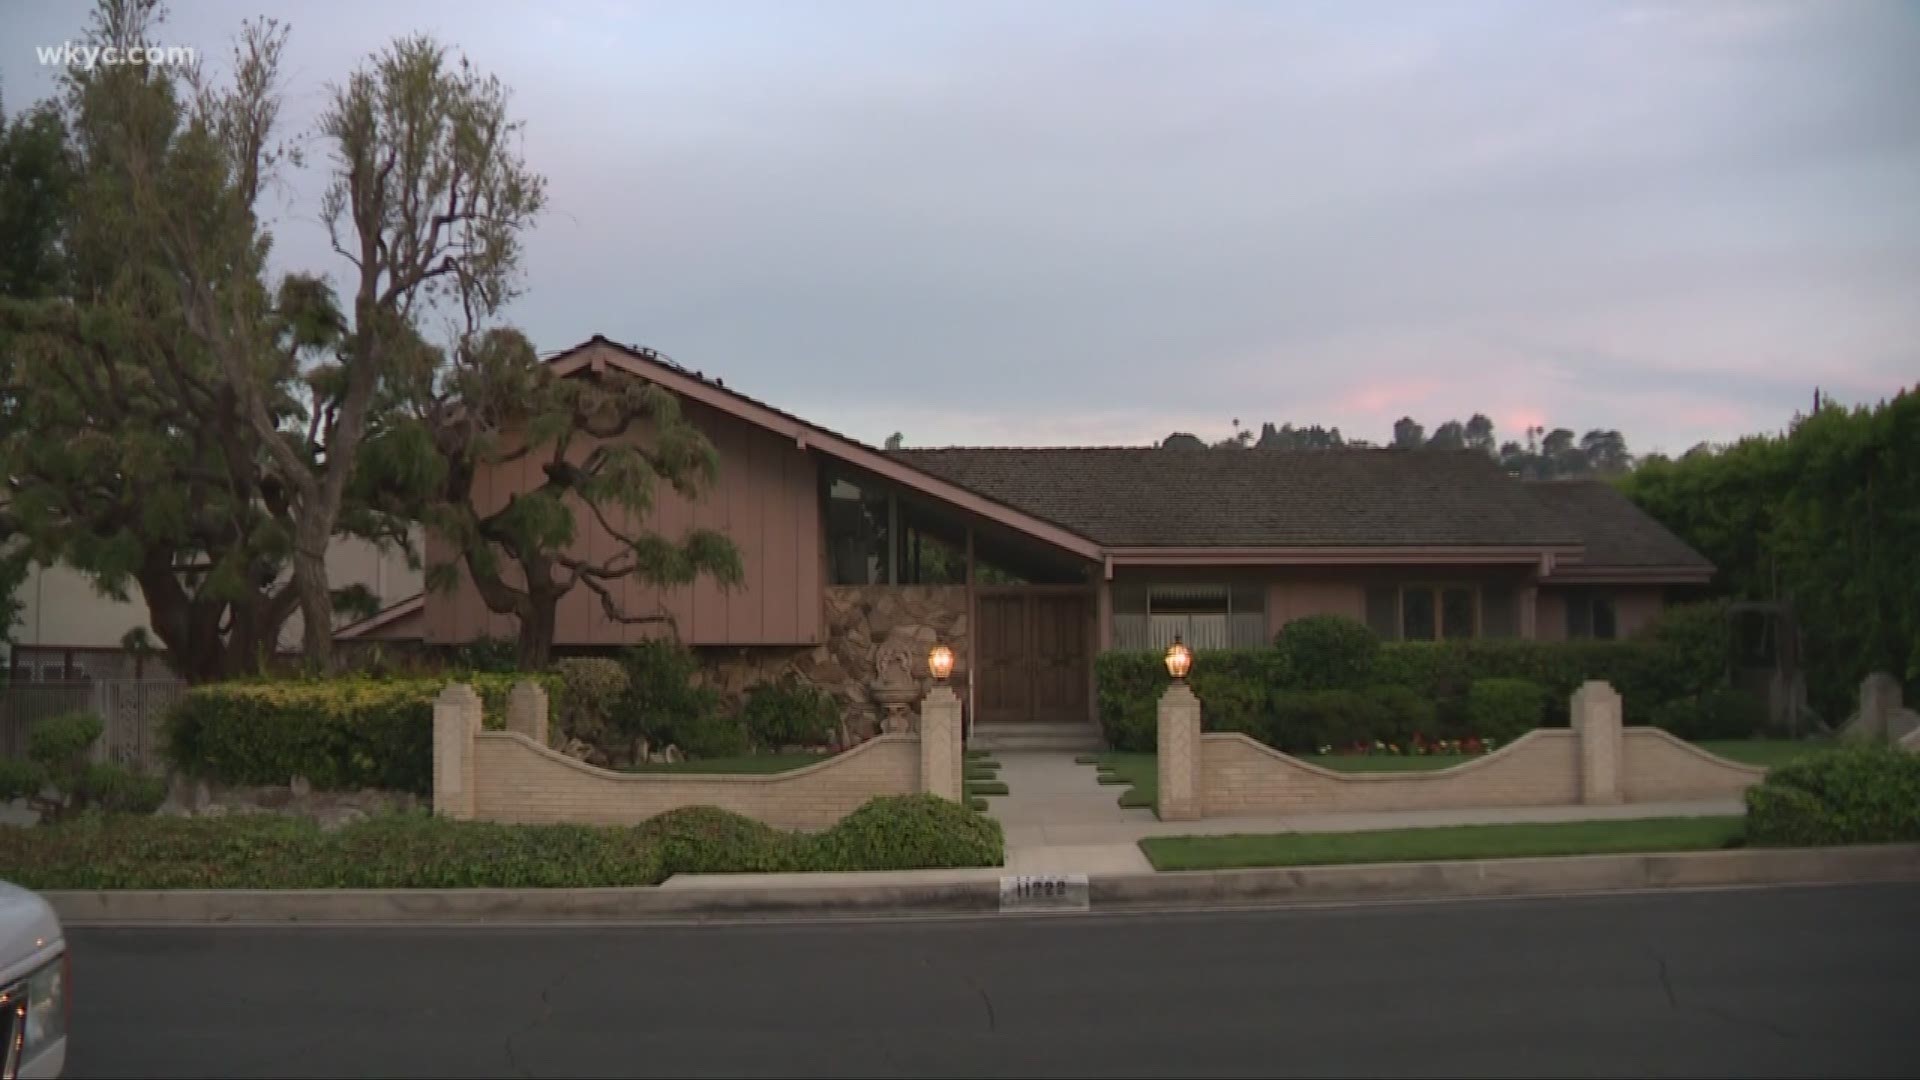 July 20, 2018: Now YOU can live just like the 'Brady Bunch' because their iconic house is for sale. Our own Will Ujek offered up his own 'Brady Bunch' song just for fun...